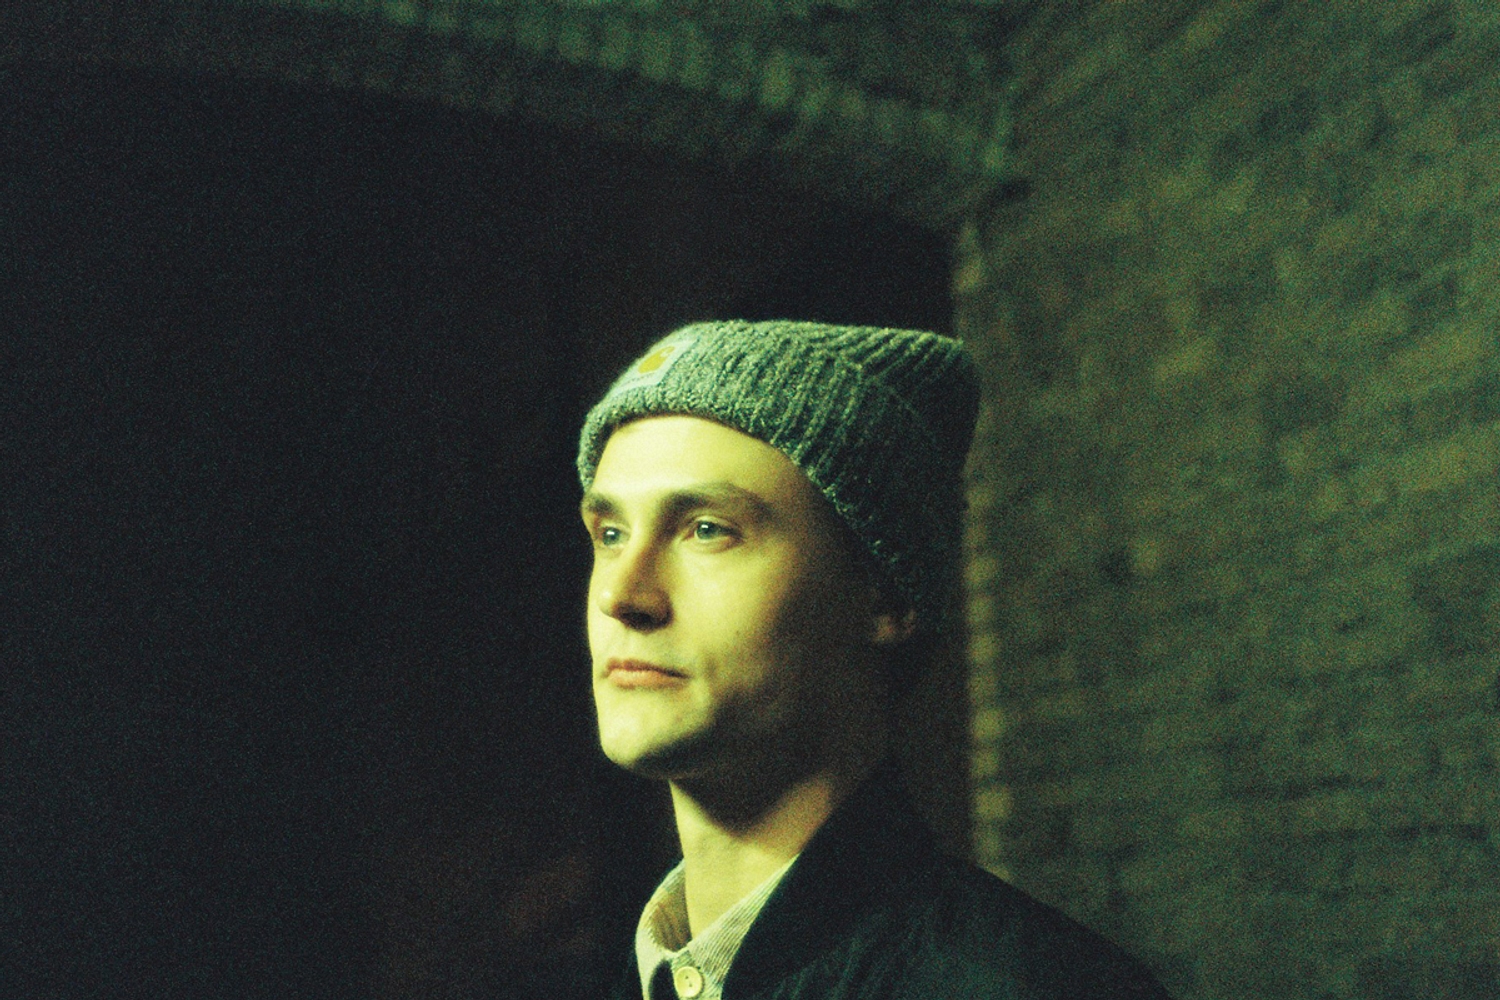 Lapalux shares ambitious new track, ‘Movement I, II & III’